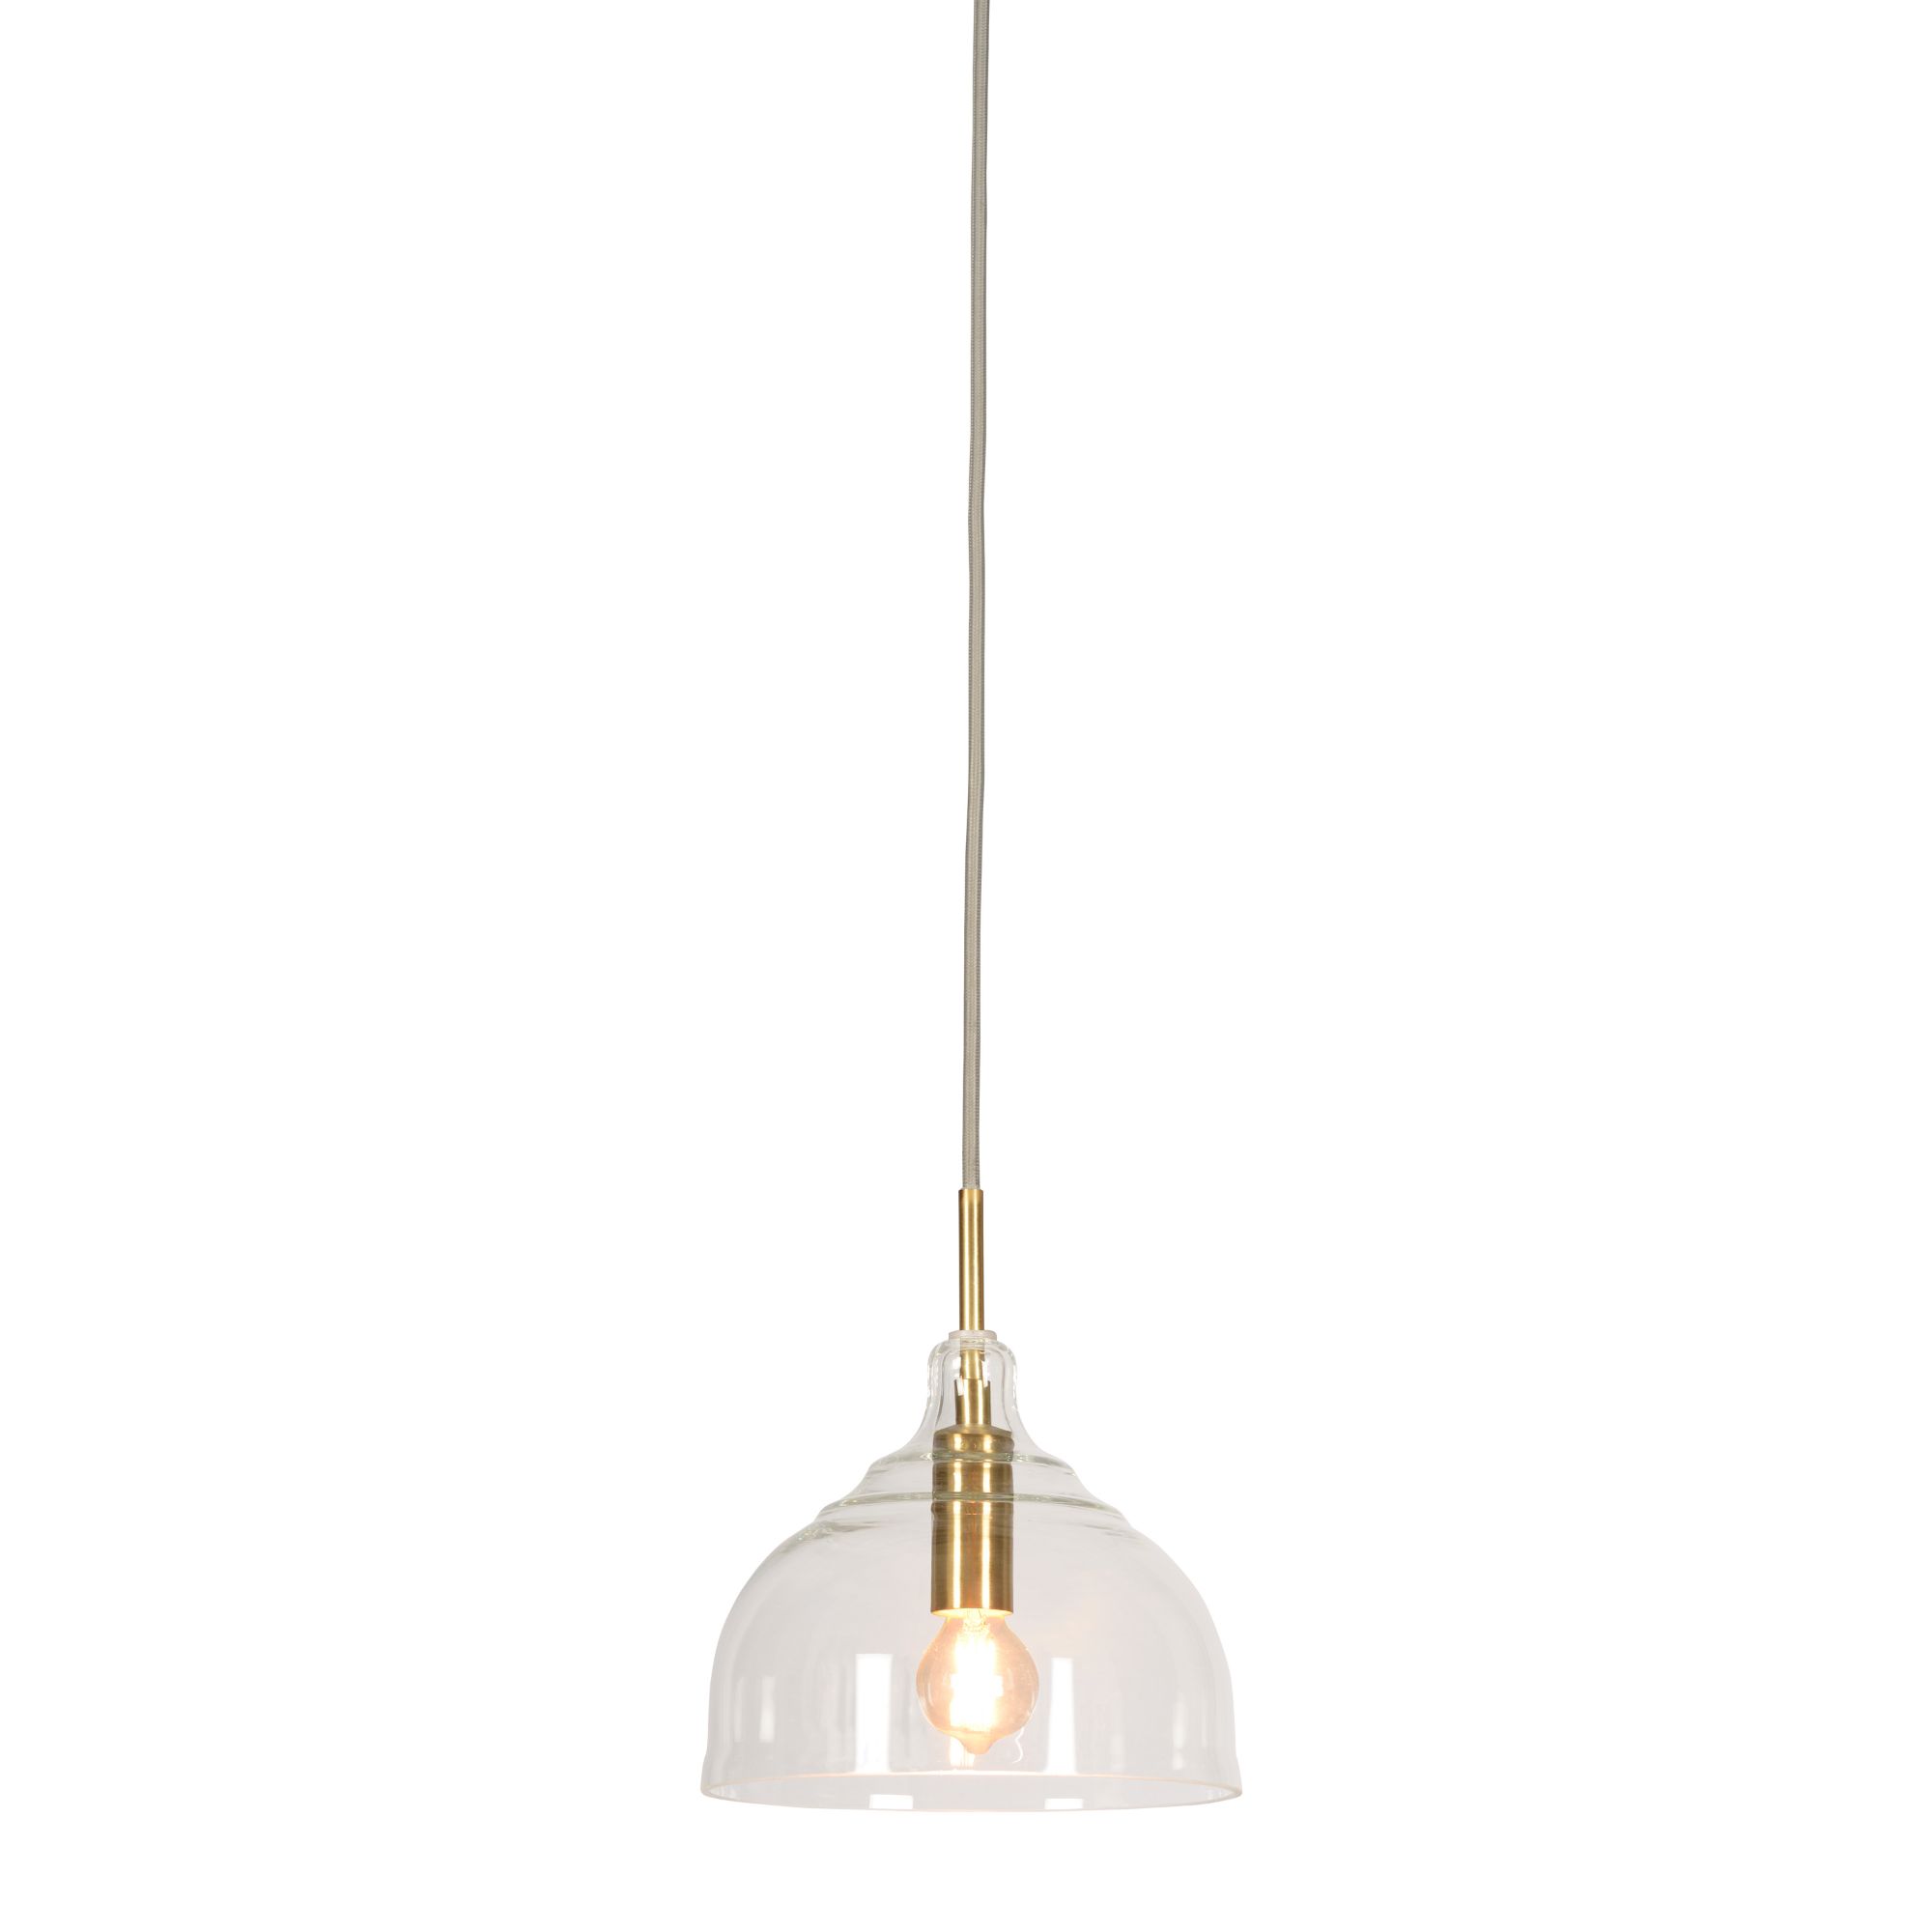 it's about RoMi - Hanglamp glas Brussels transp/goud rond